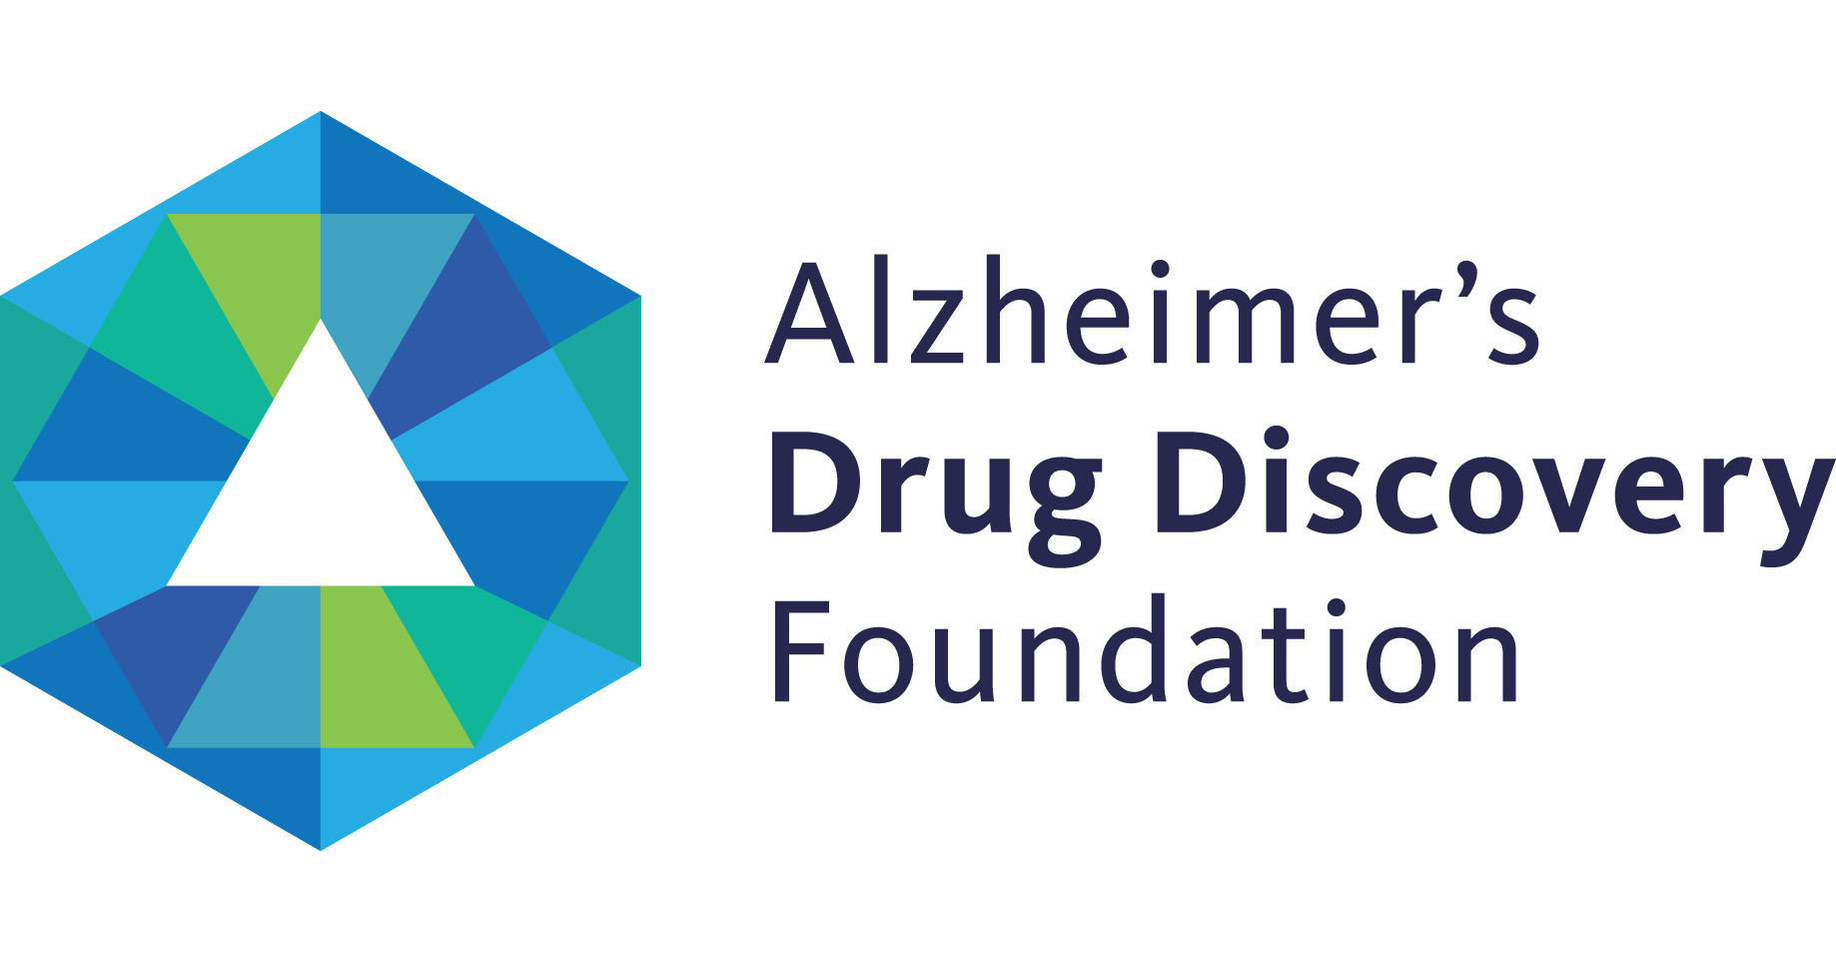 ADDF Statement on Topline Results of Phase 3 Trial of Amyloid-Clearing Drug Lecanemab